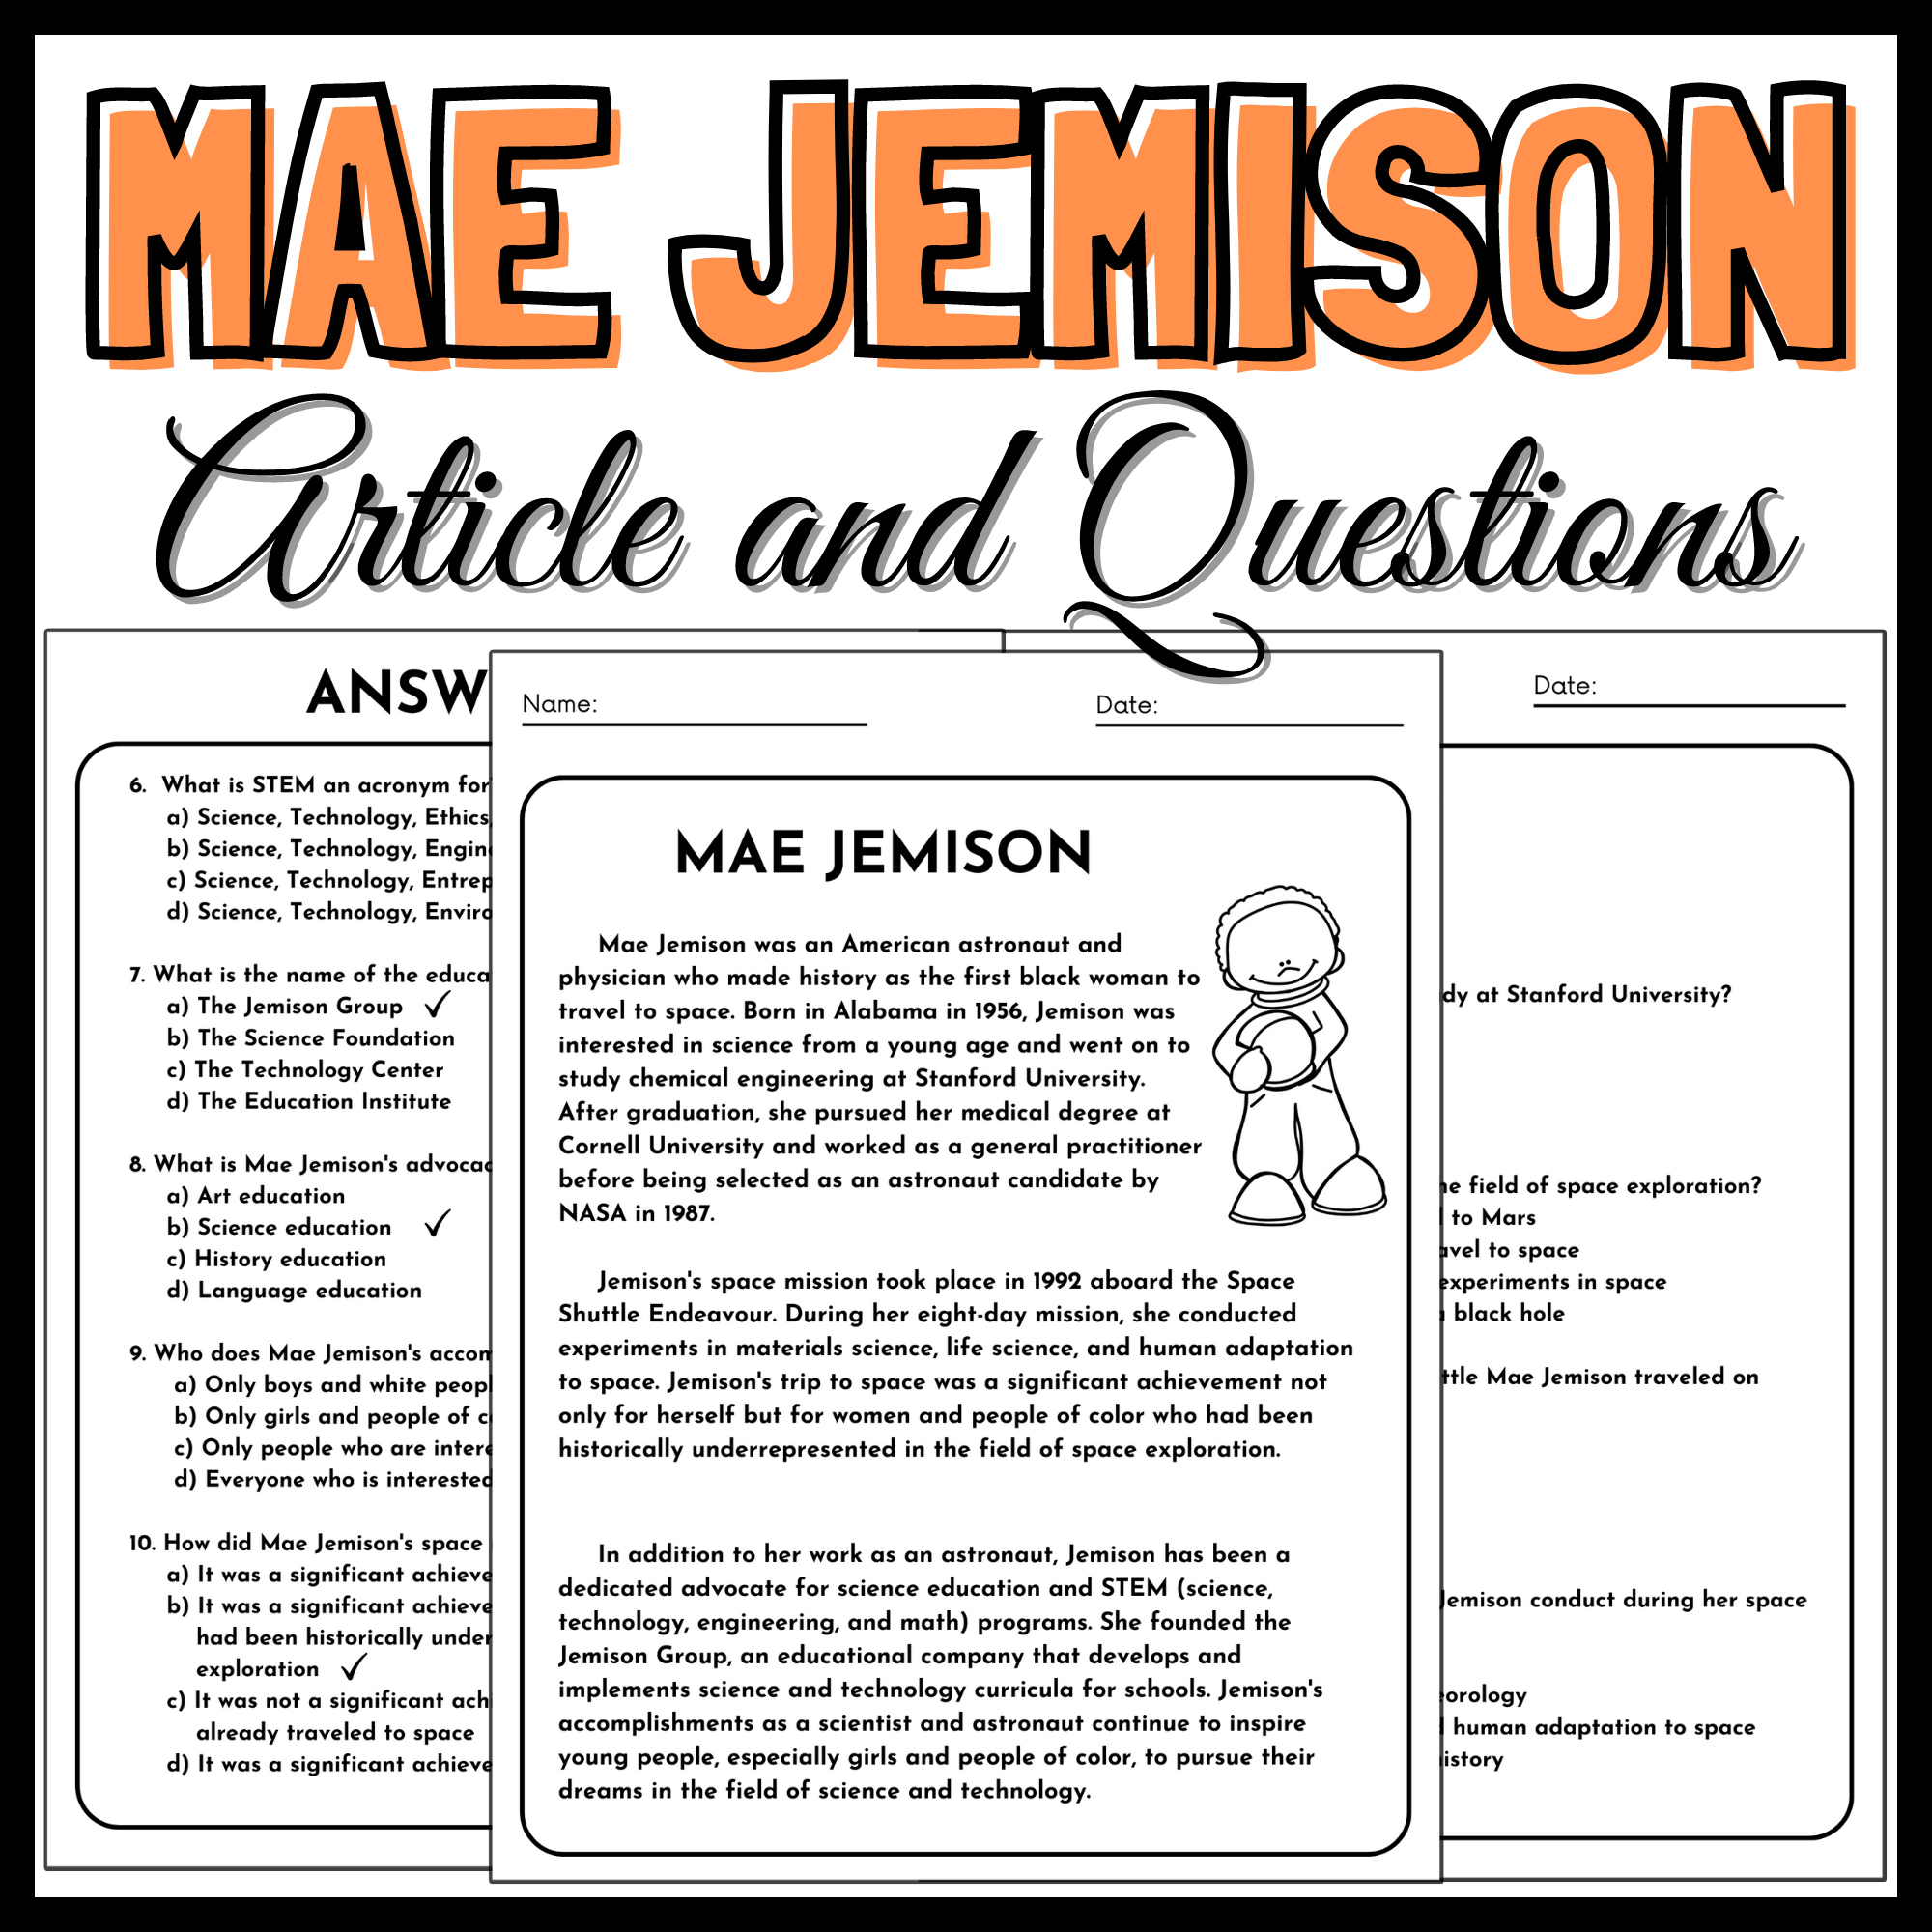 Mae jemison reading prehension article and questions passages made by teachers